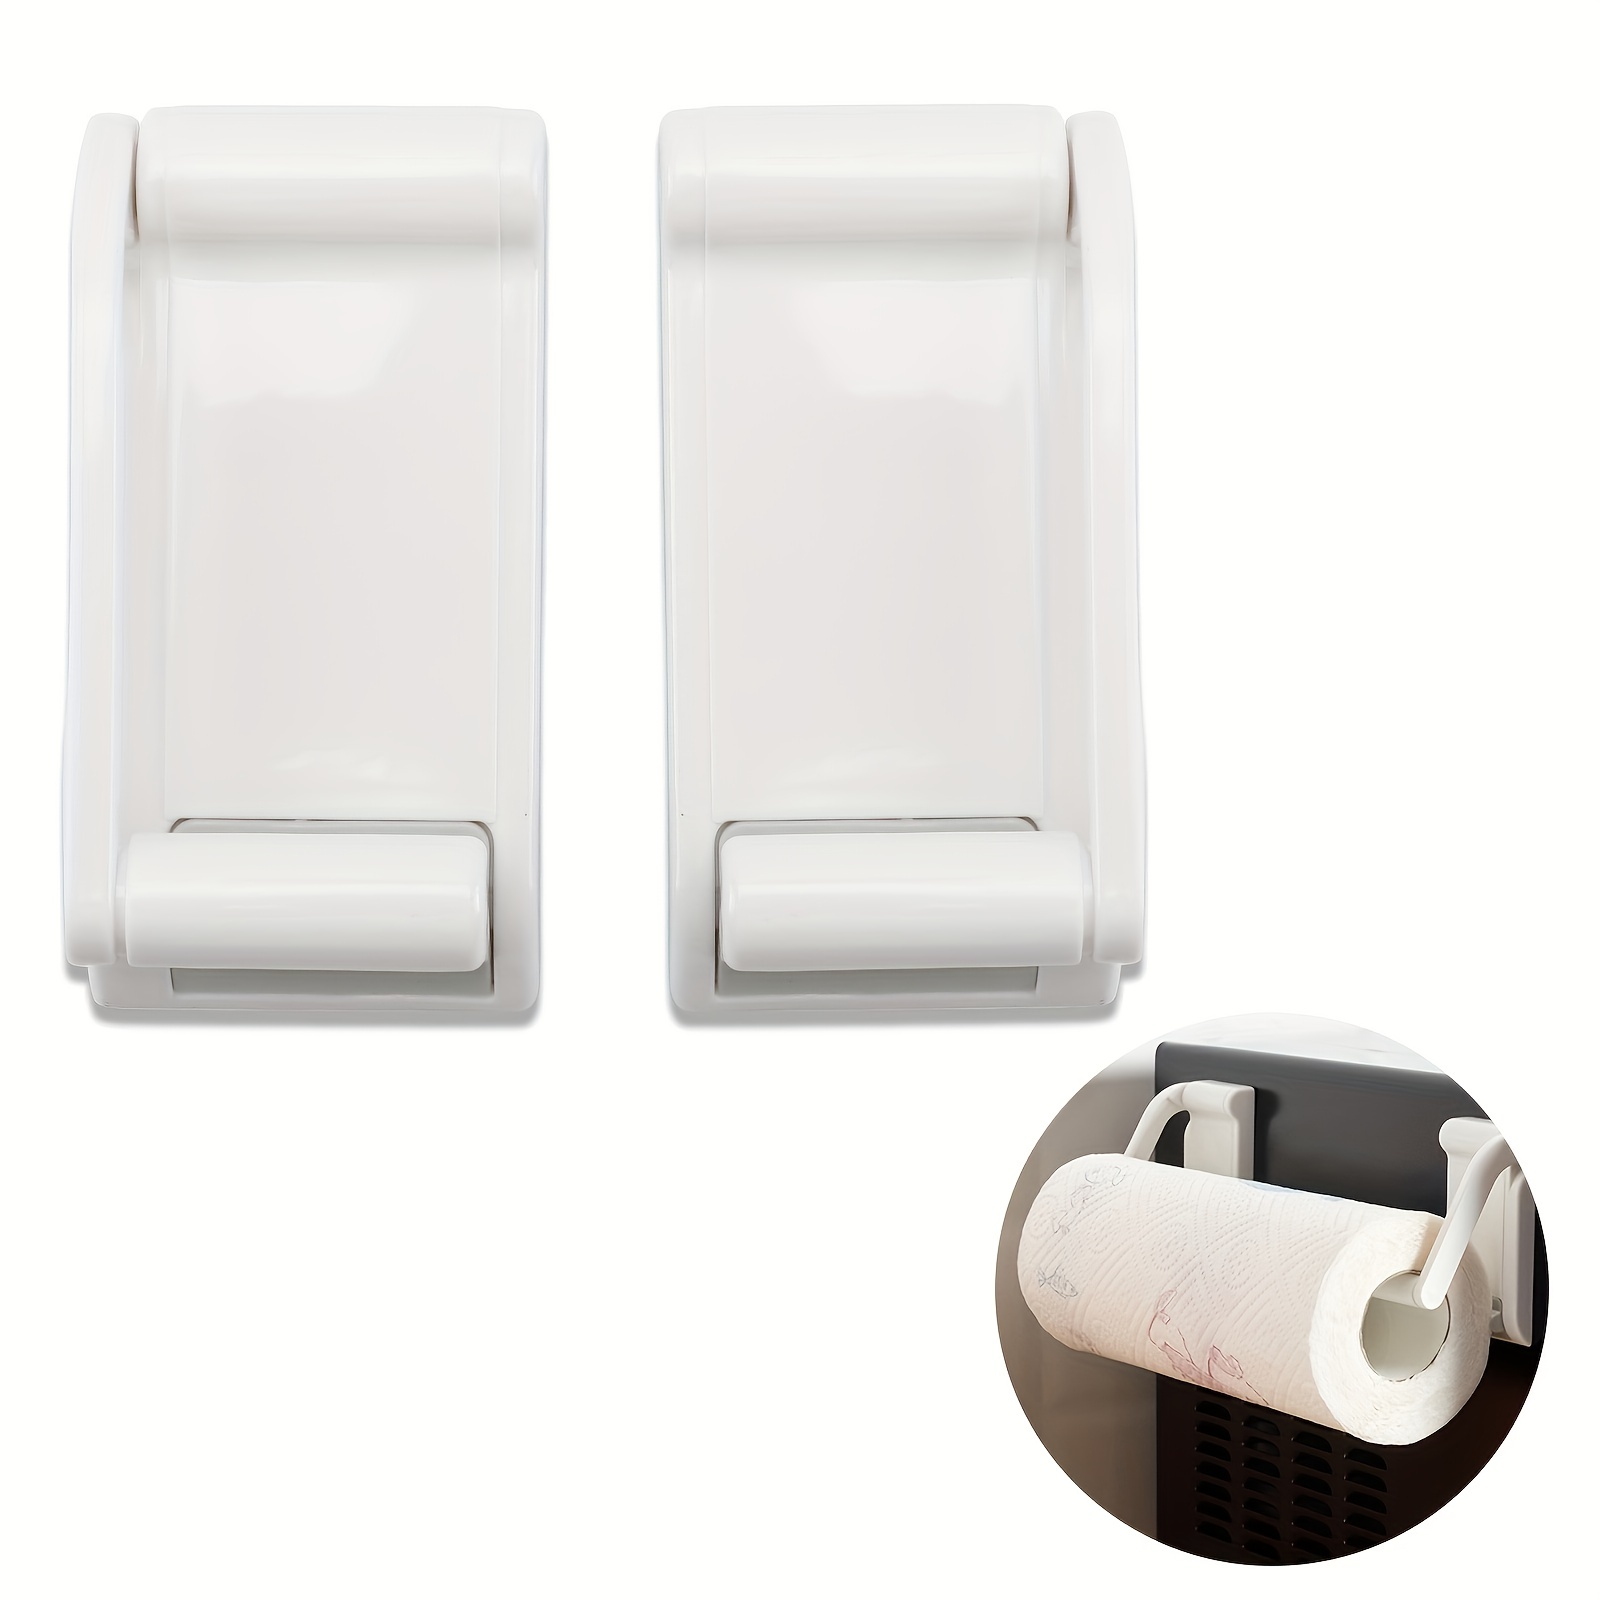 Strong Magnetic Paper Towel Holder Wall Mount White Plastic